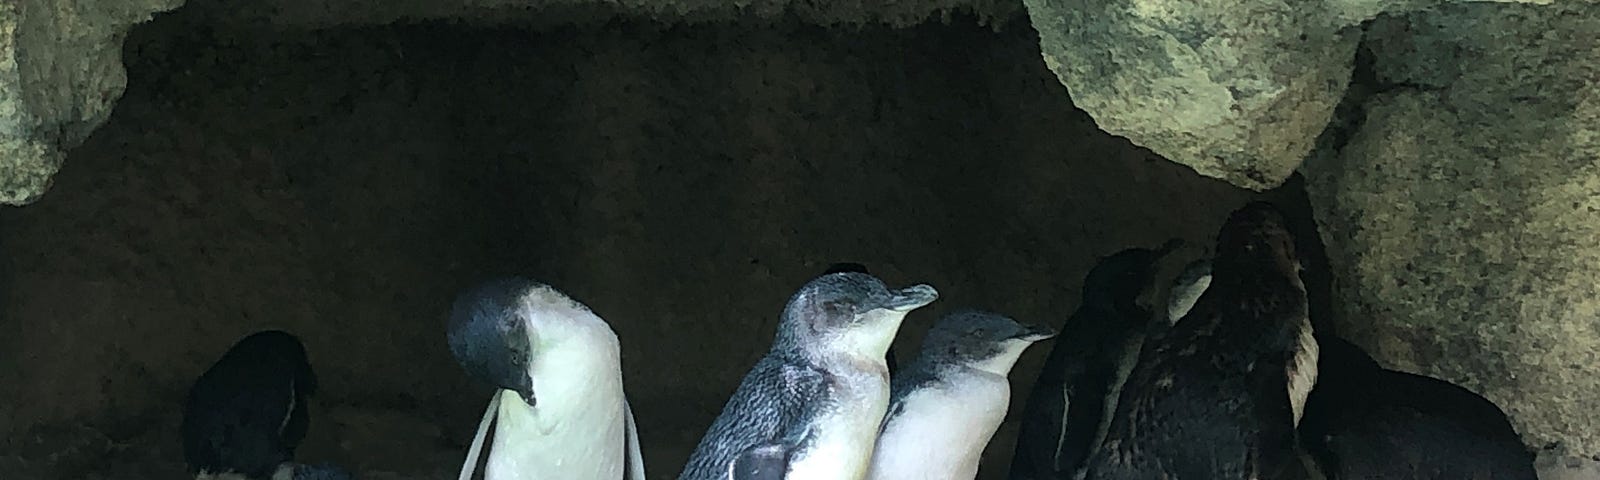 Penguins sheltering in manmade limestone cave